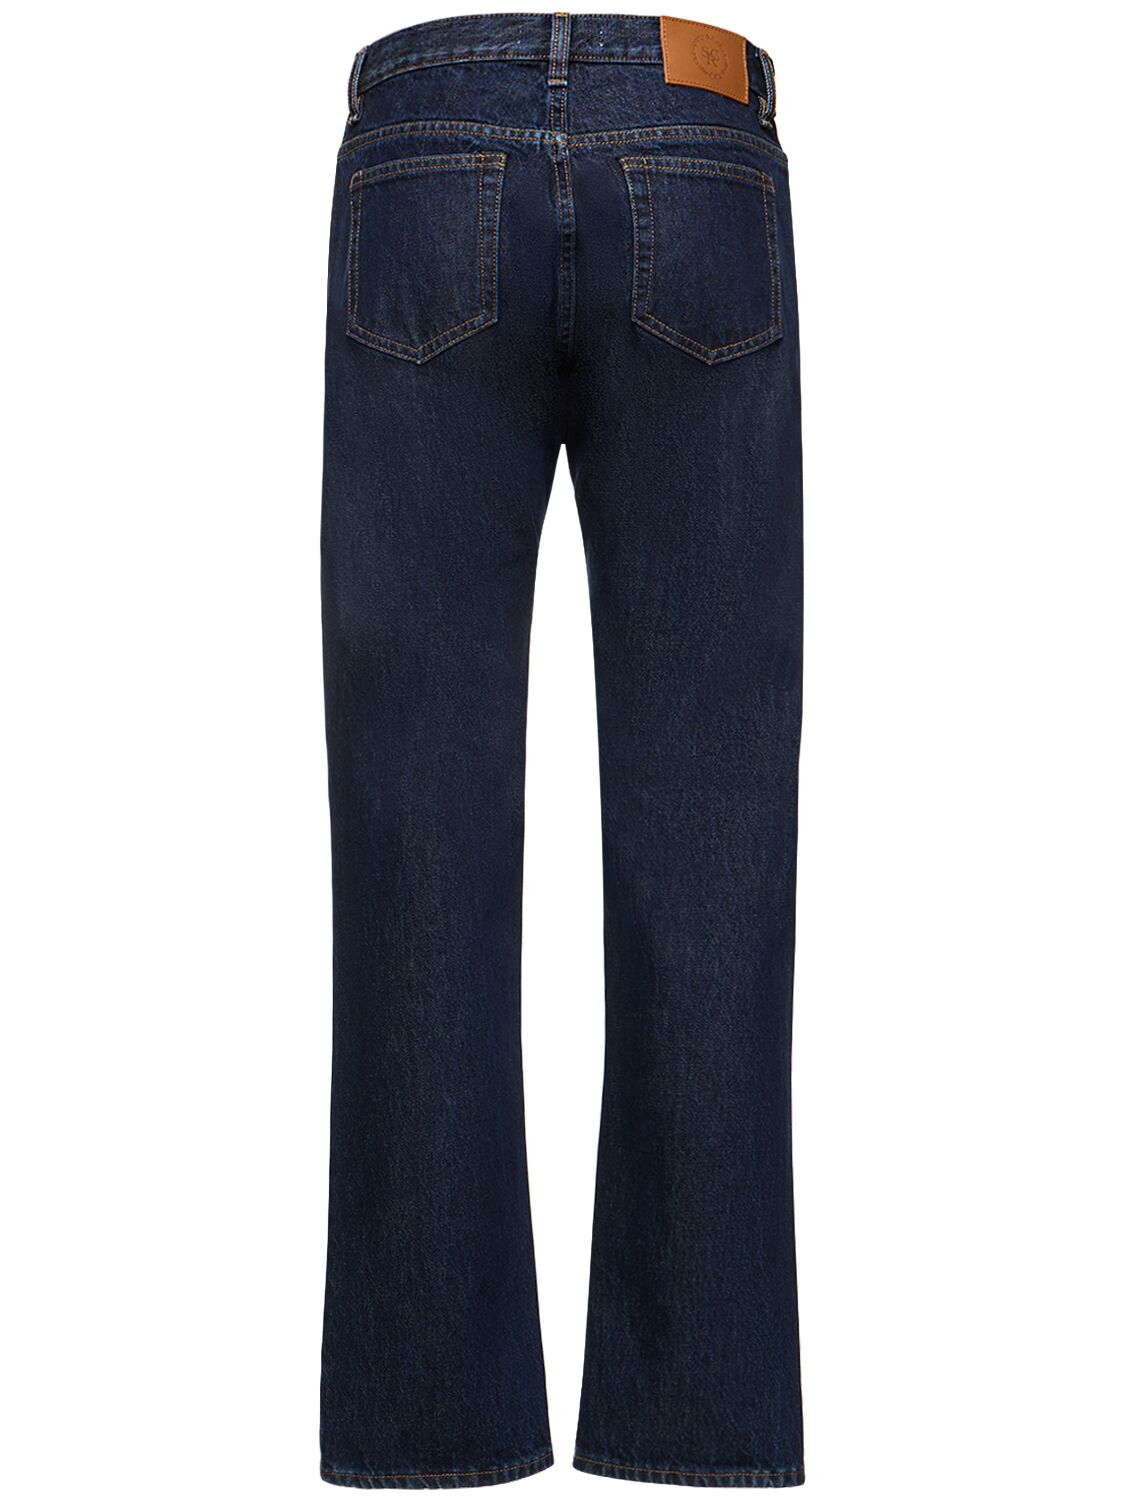 Shop Sporty And Rich Vintage Fit Denim Jeans In Navy